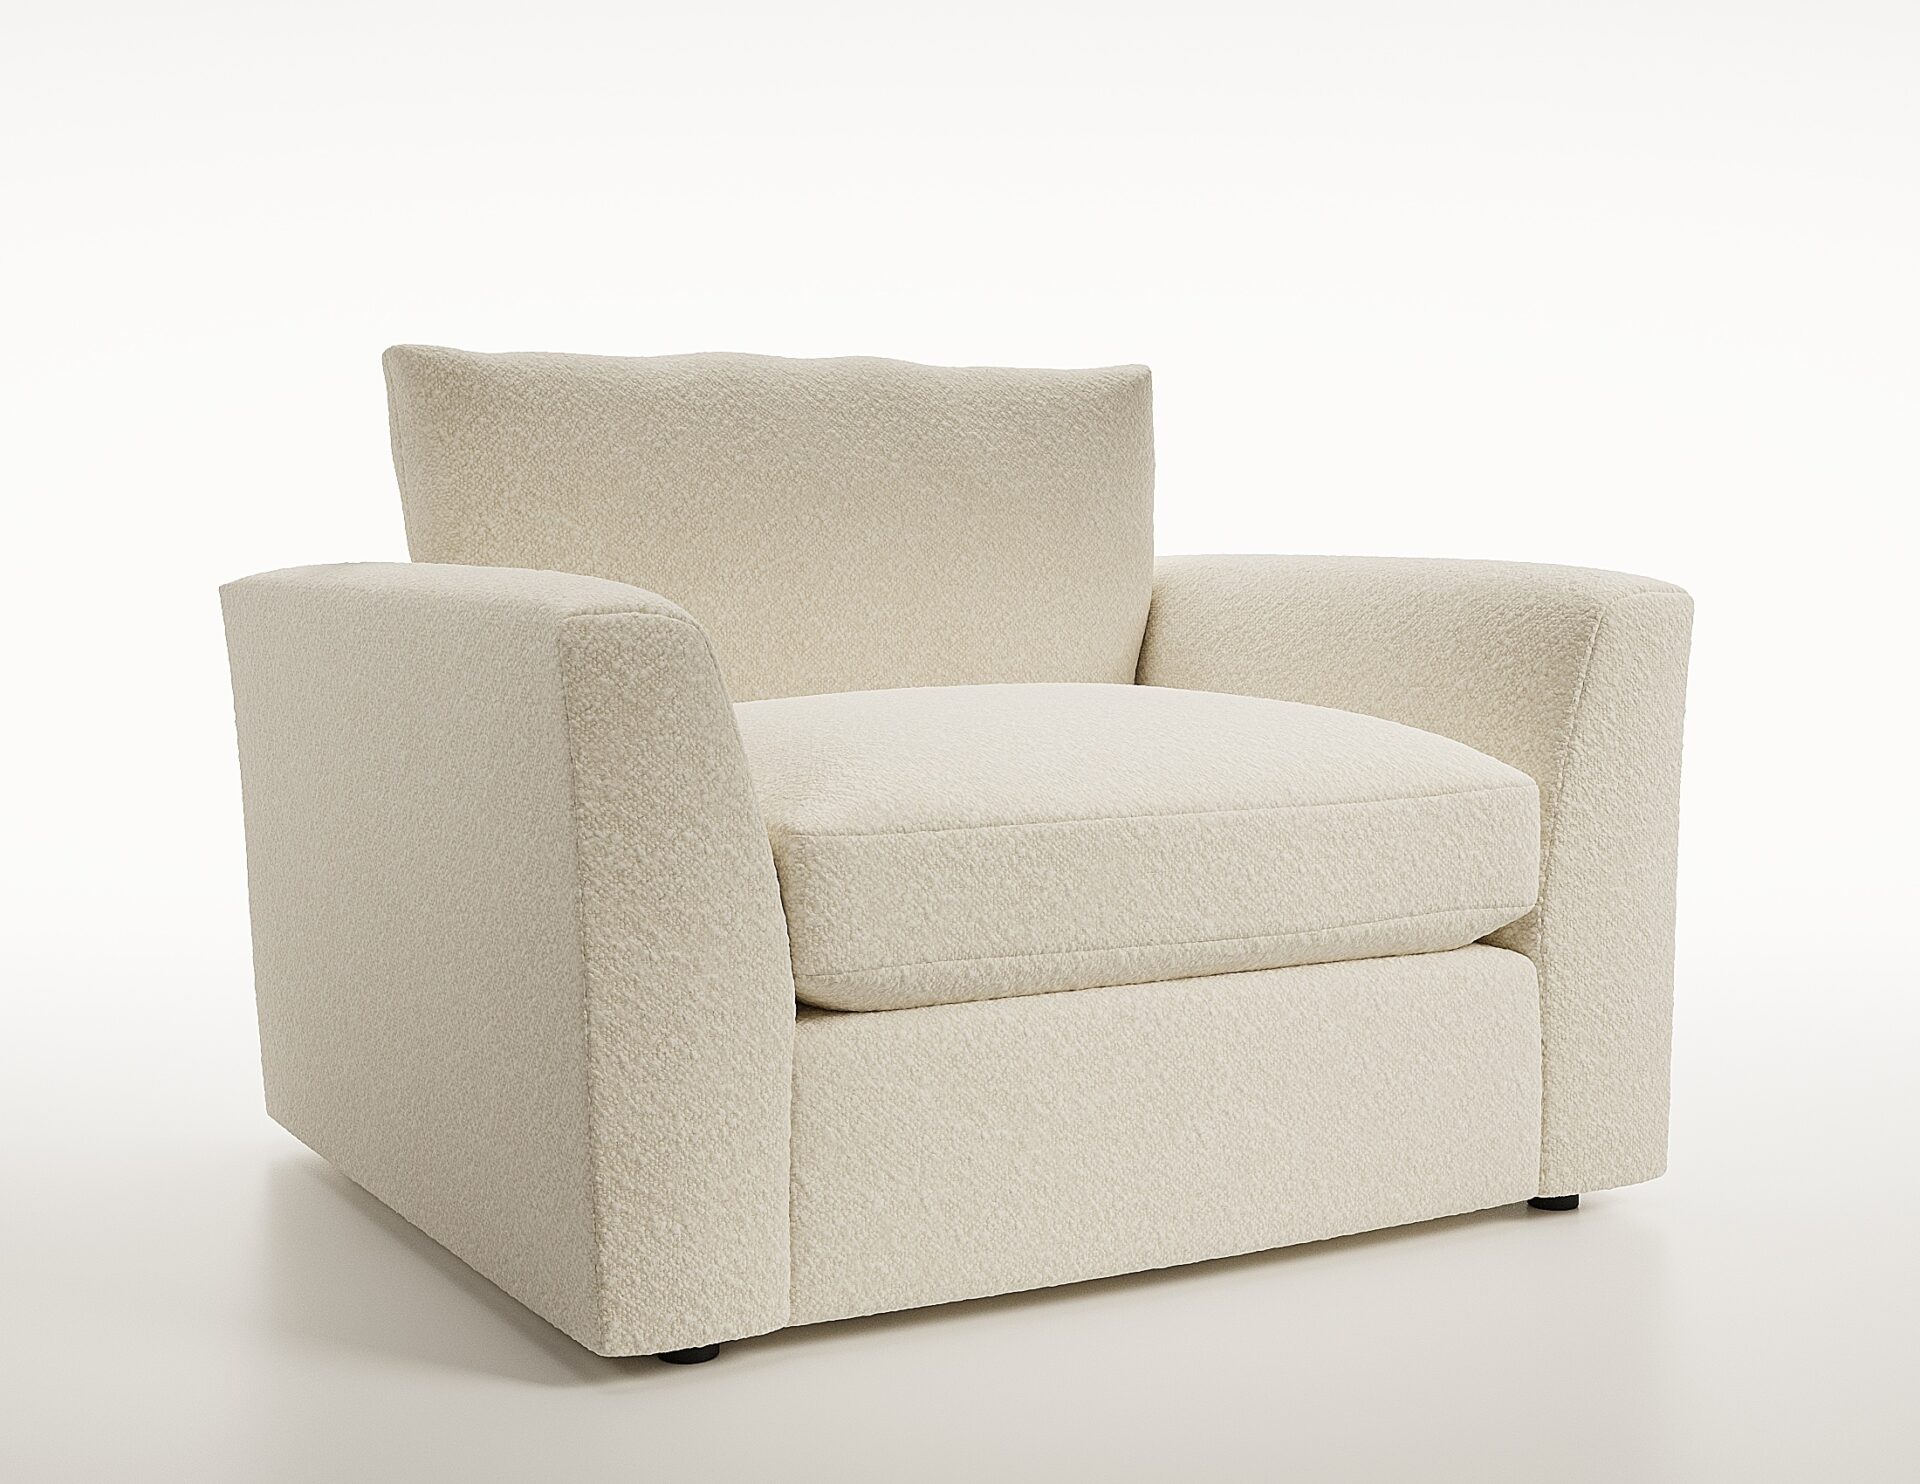 JESSE-upholstered-chair-luxury-furniture-blend-home-furnishings